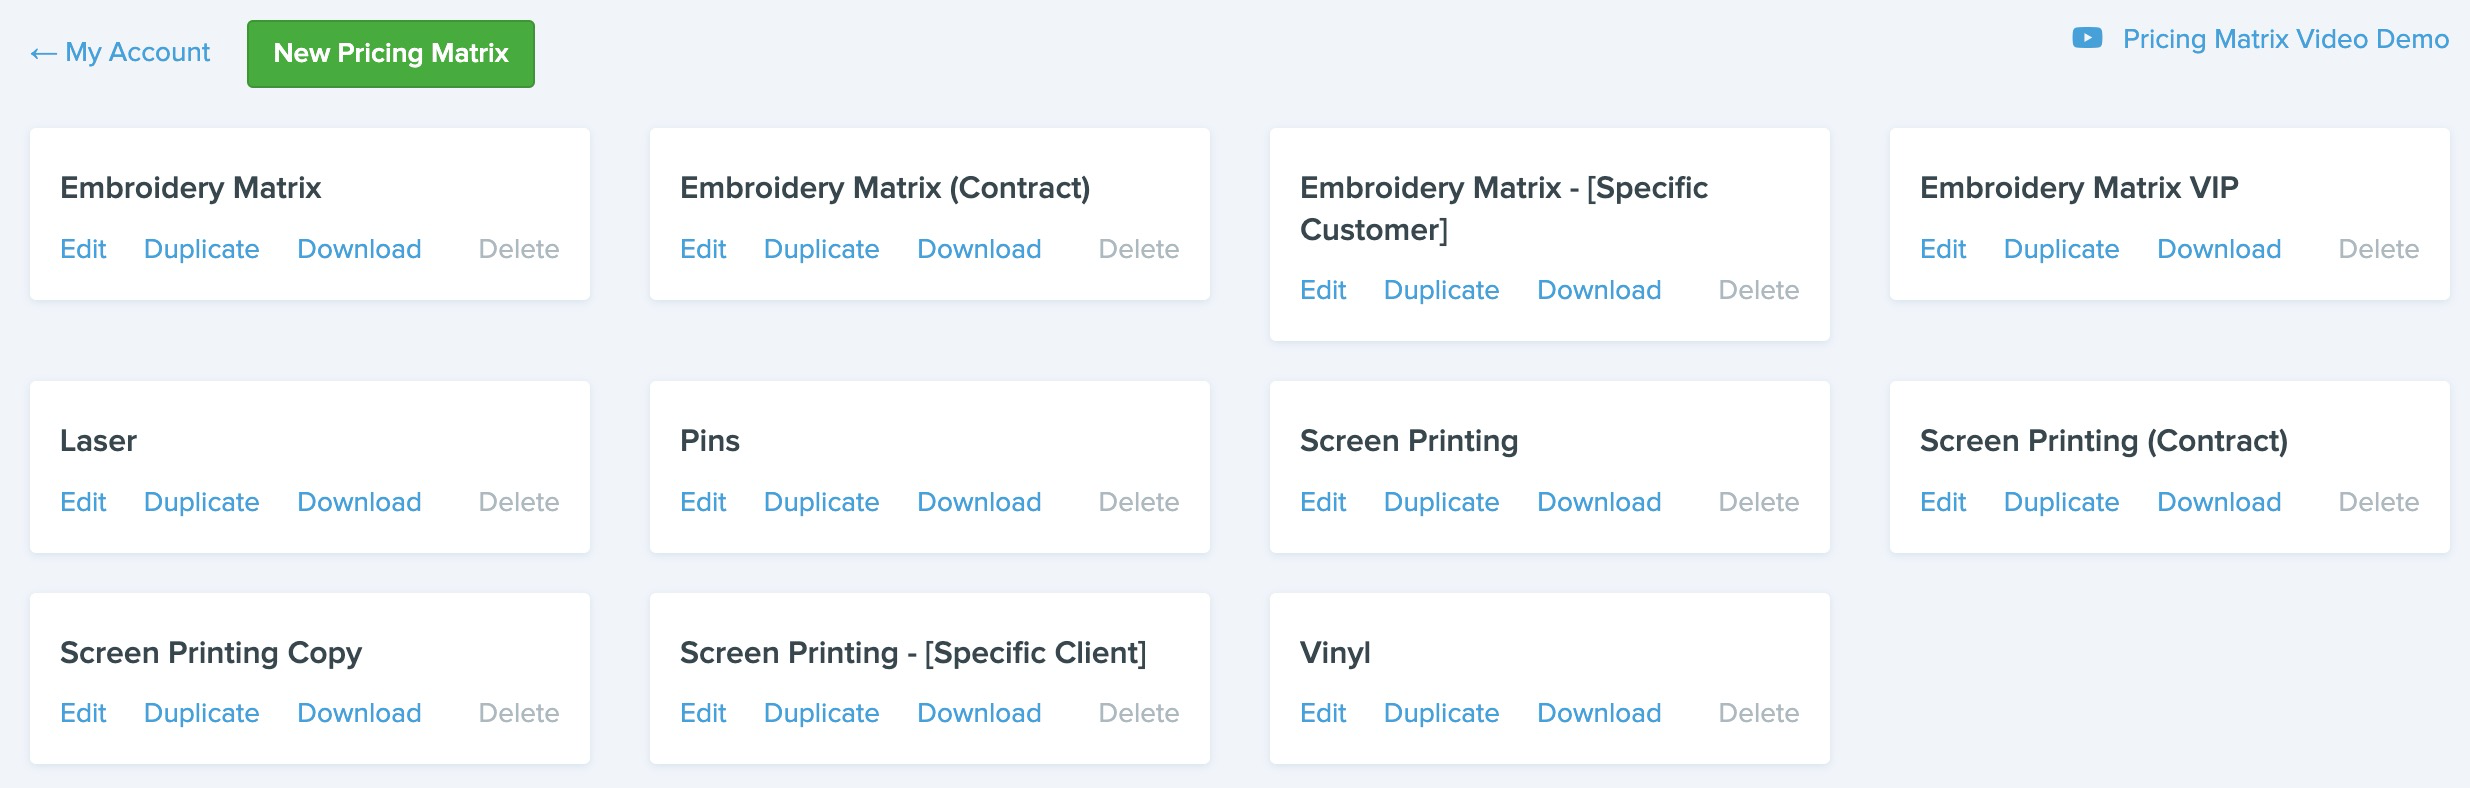 Unlimited pricing matrices are now available in Printavo!